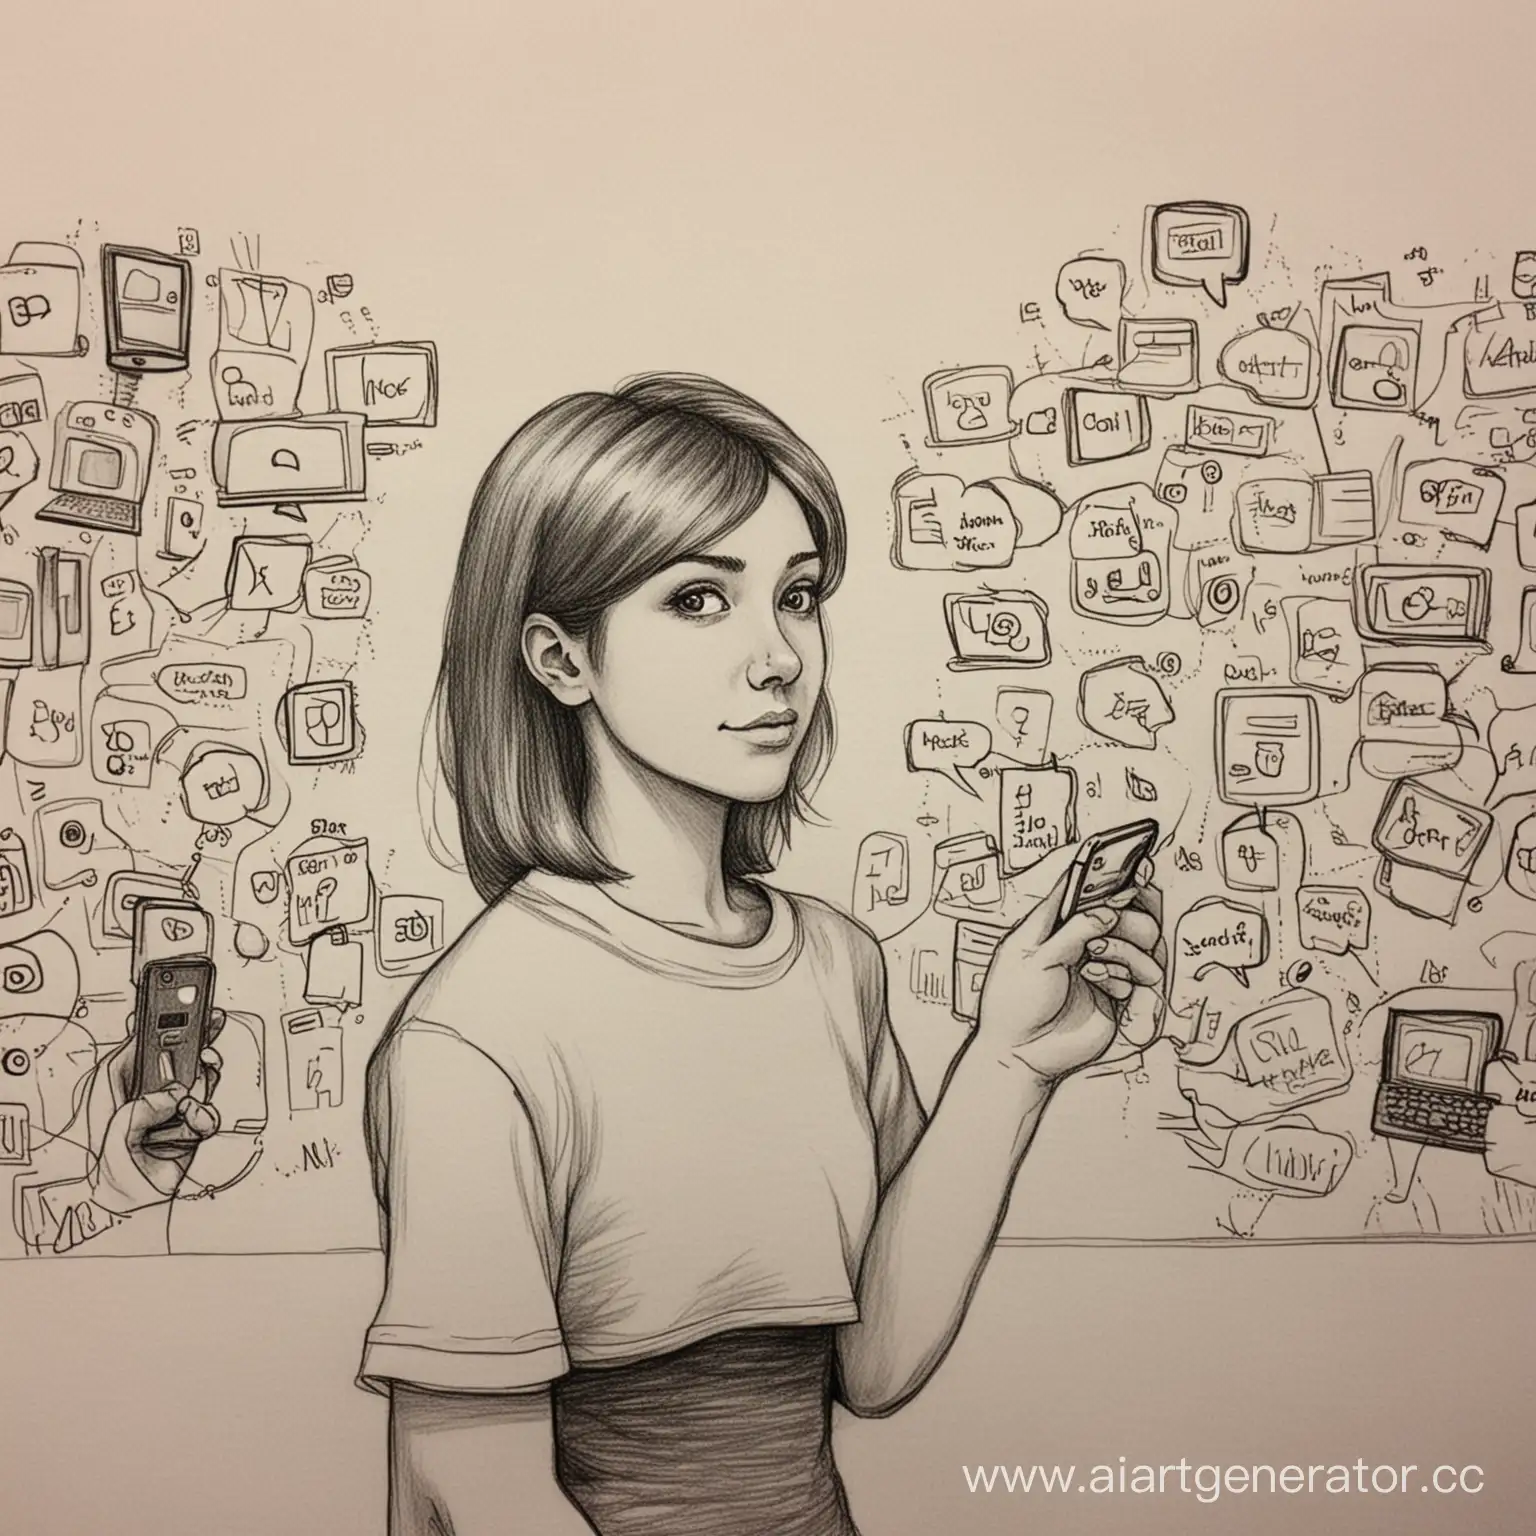 Negative-Effects-of-Social-Networks-on-Teenagers-Lives-Depicted-in-Art